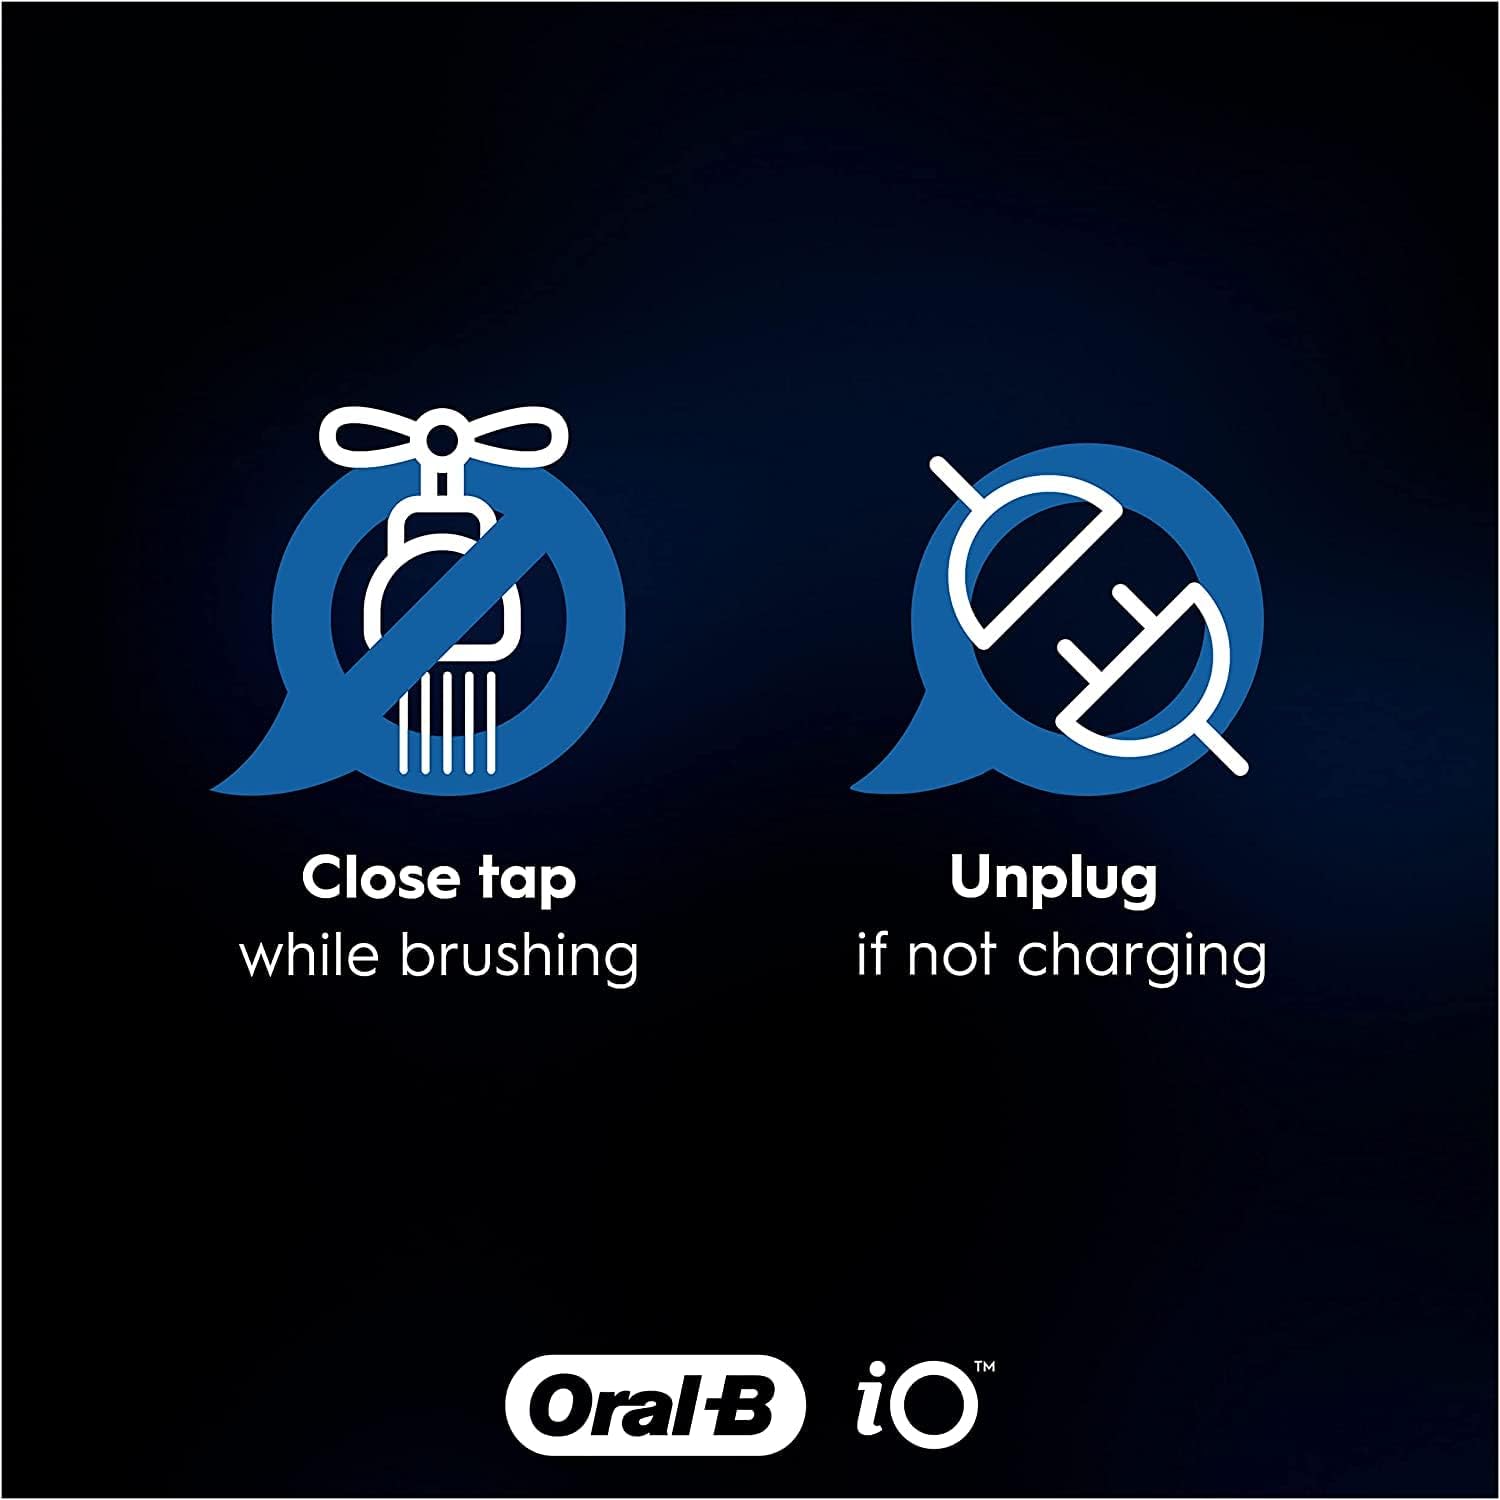 Braun Oral-B iO Series 10 Electric Rechargeable Toothbrush - Cosmic Black